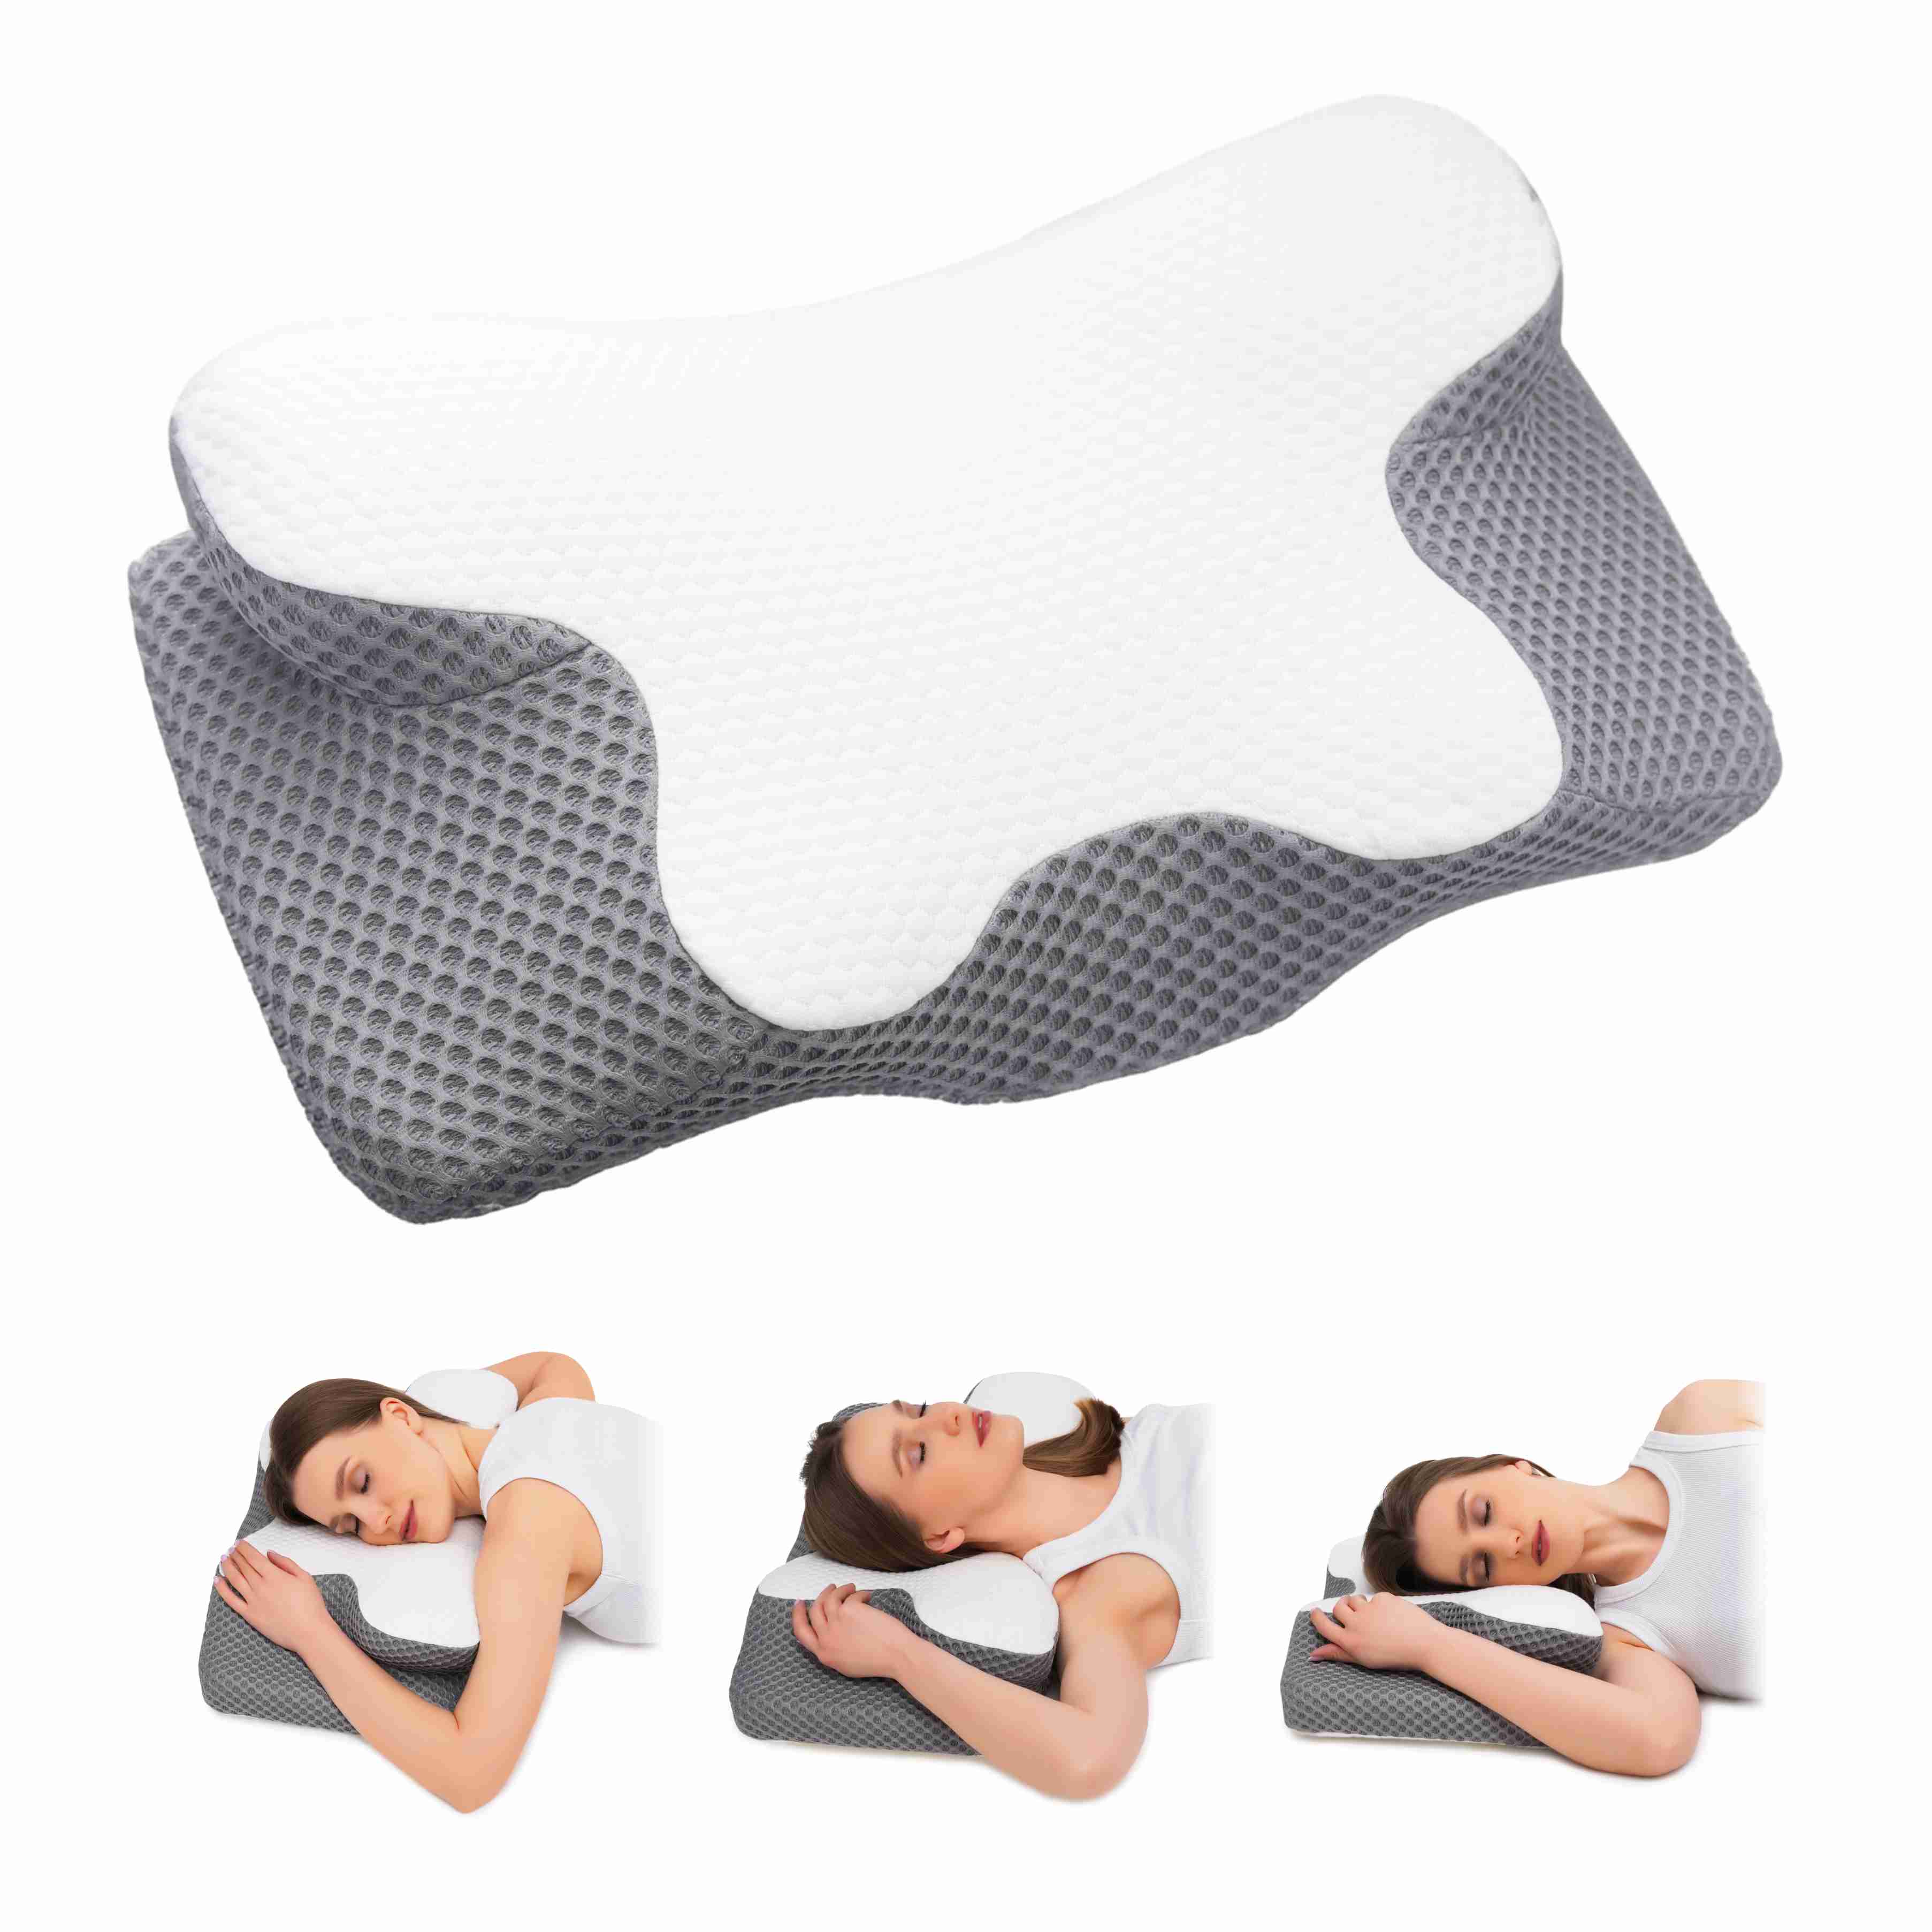 cervical-memory-foam-pillow-contour-pillows-for-neck-and-sh with cash back rebate